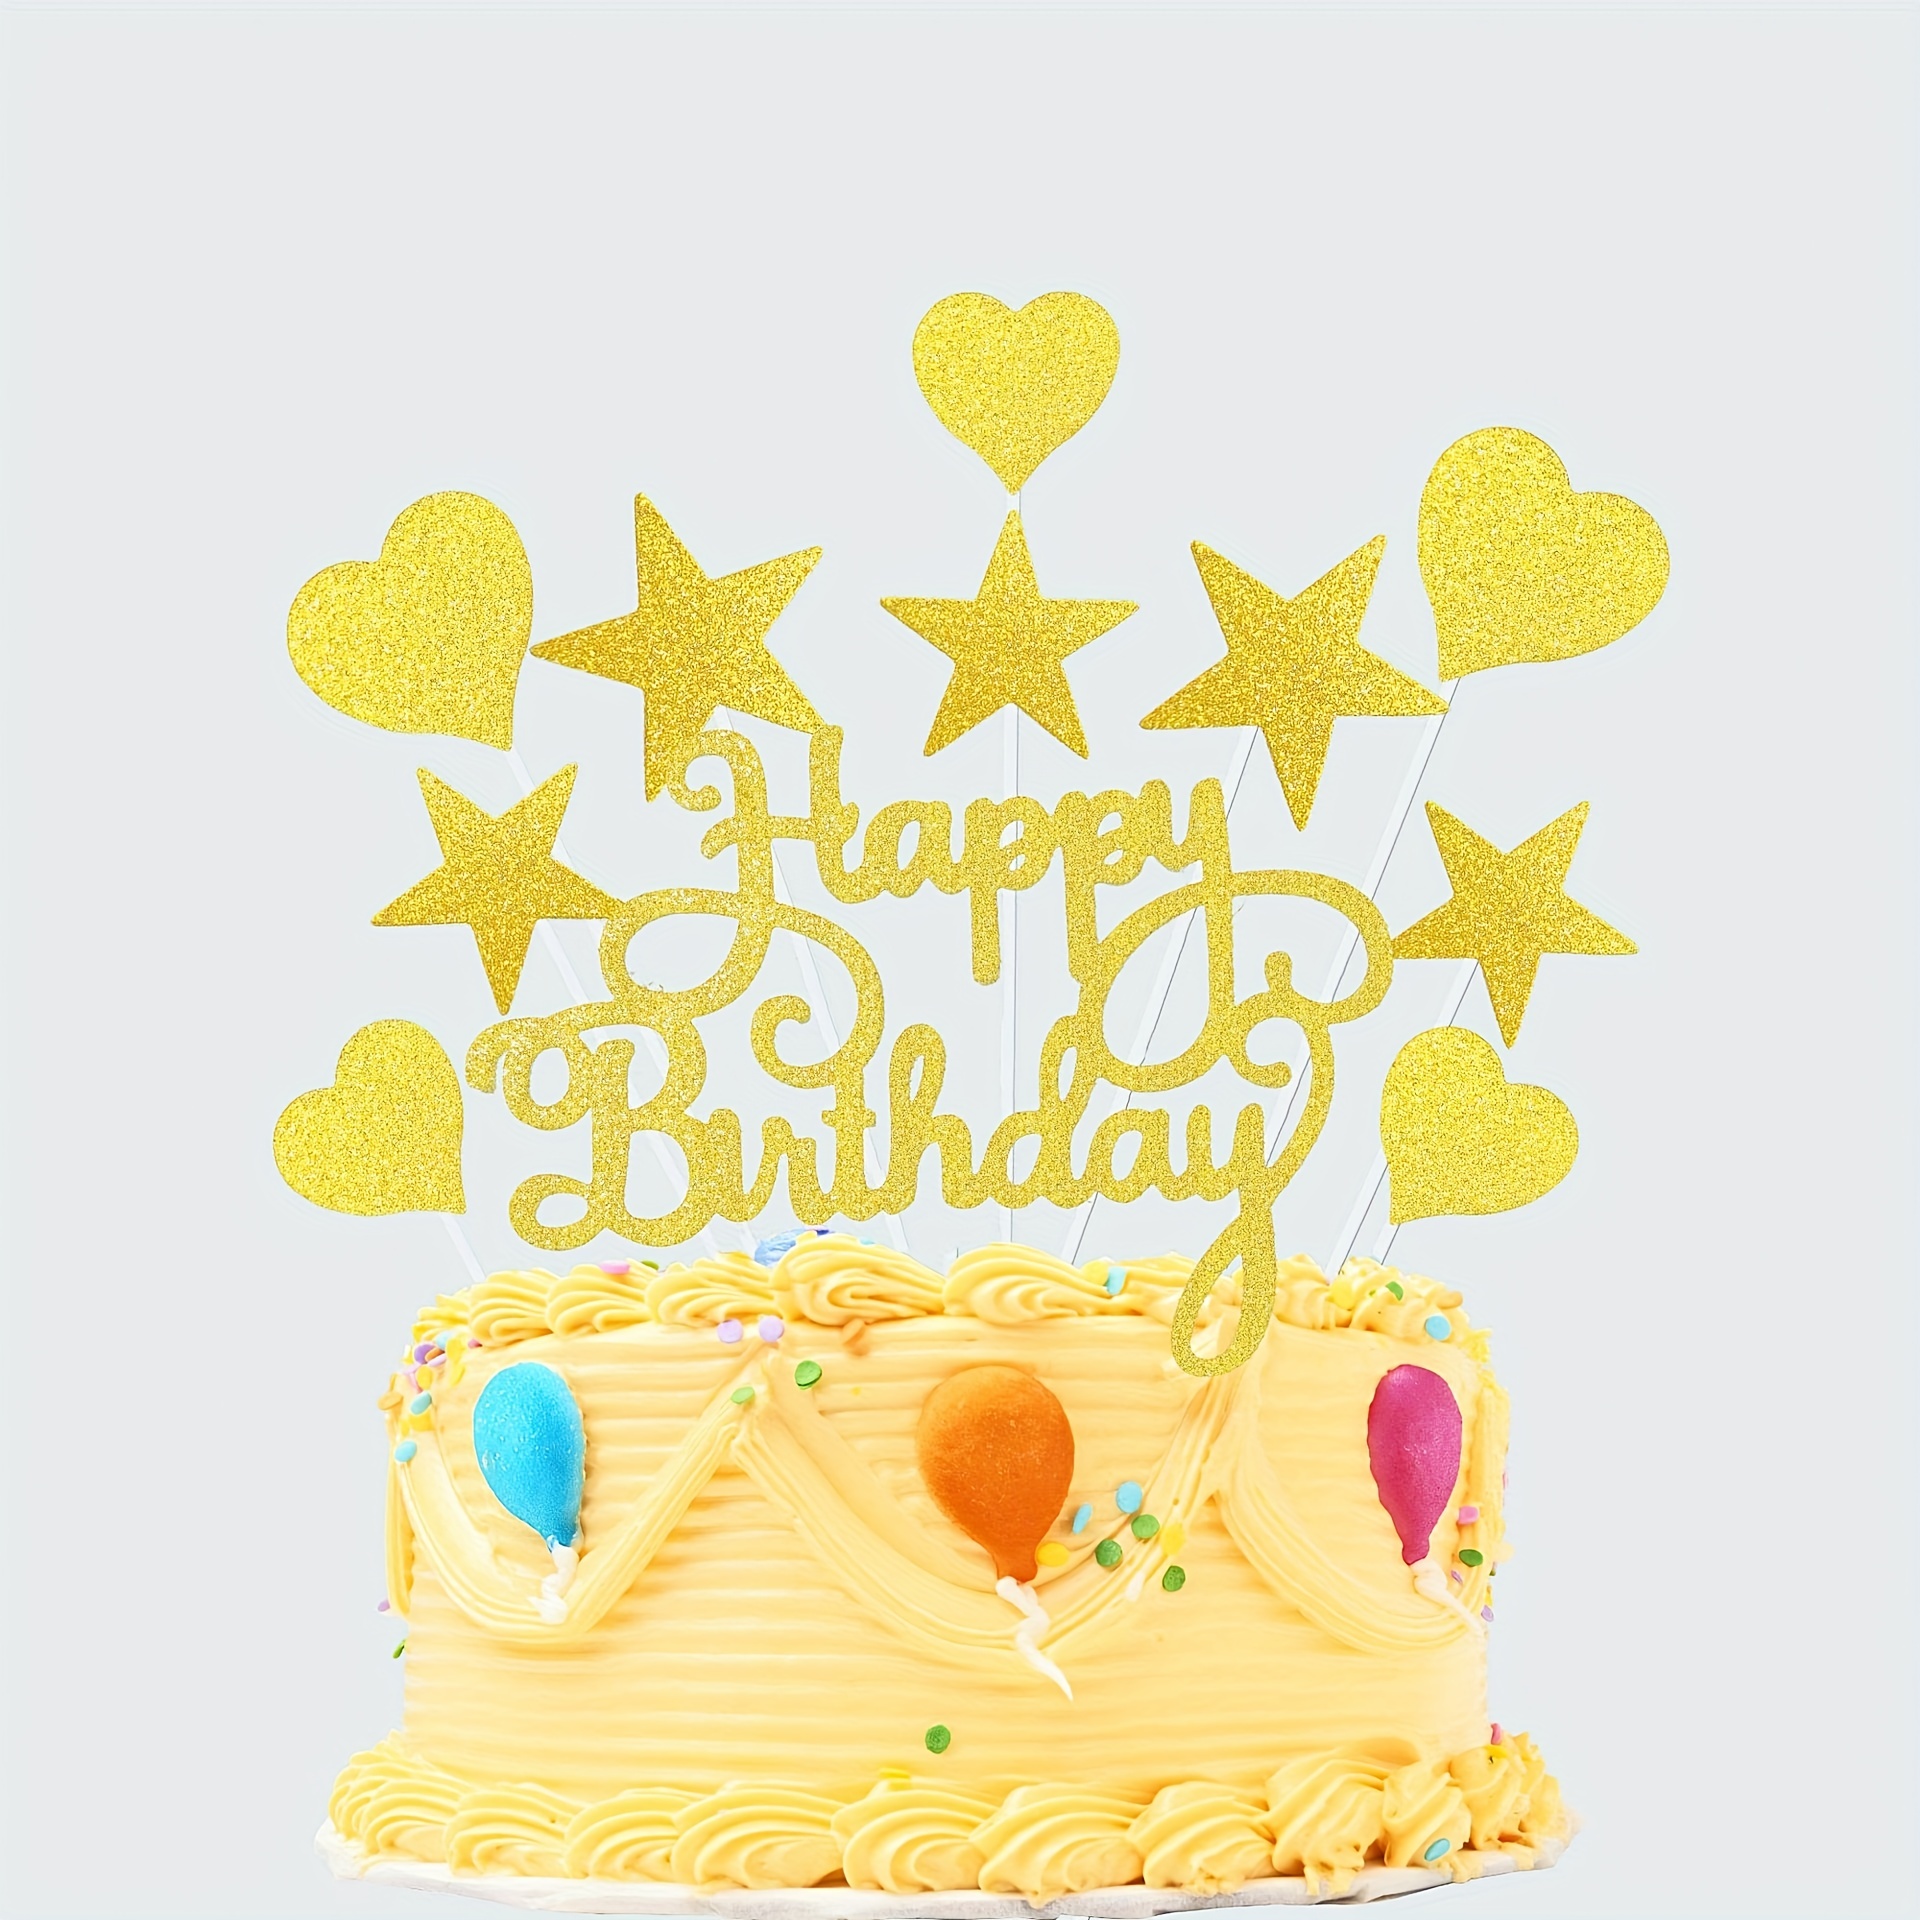 Gold Cake Topper Gold Cake Decorations, Happy Birthday Candles